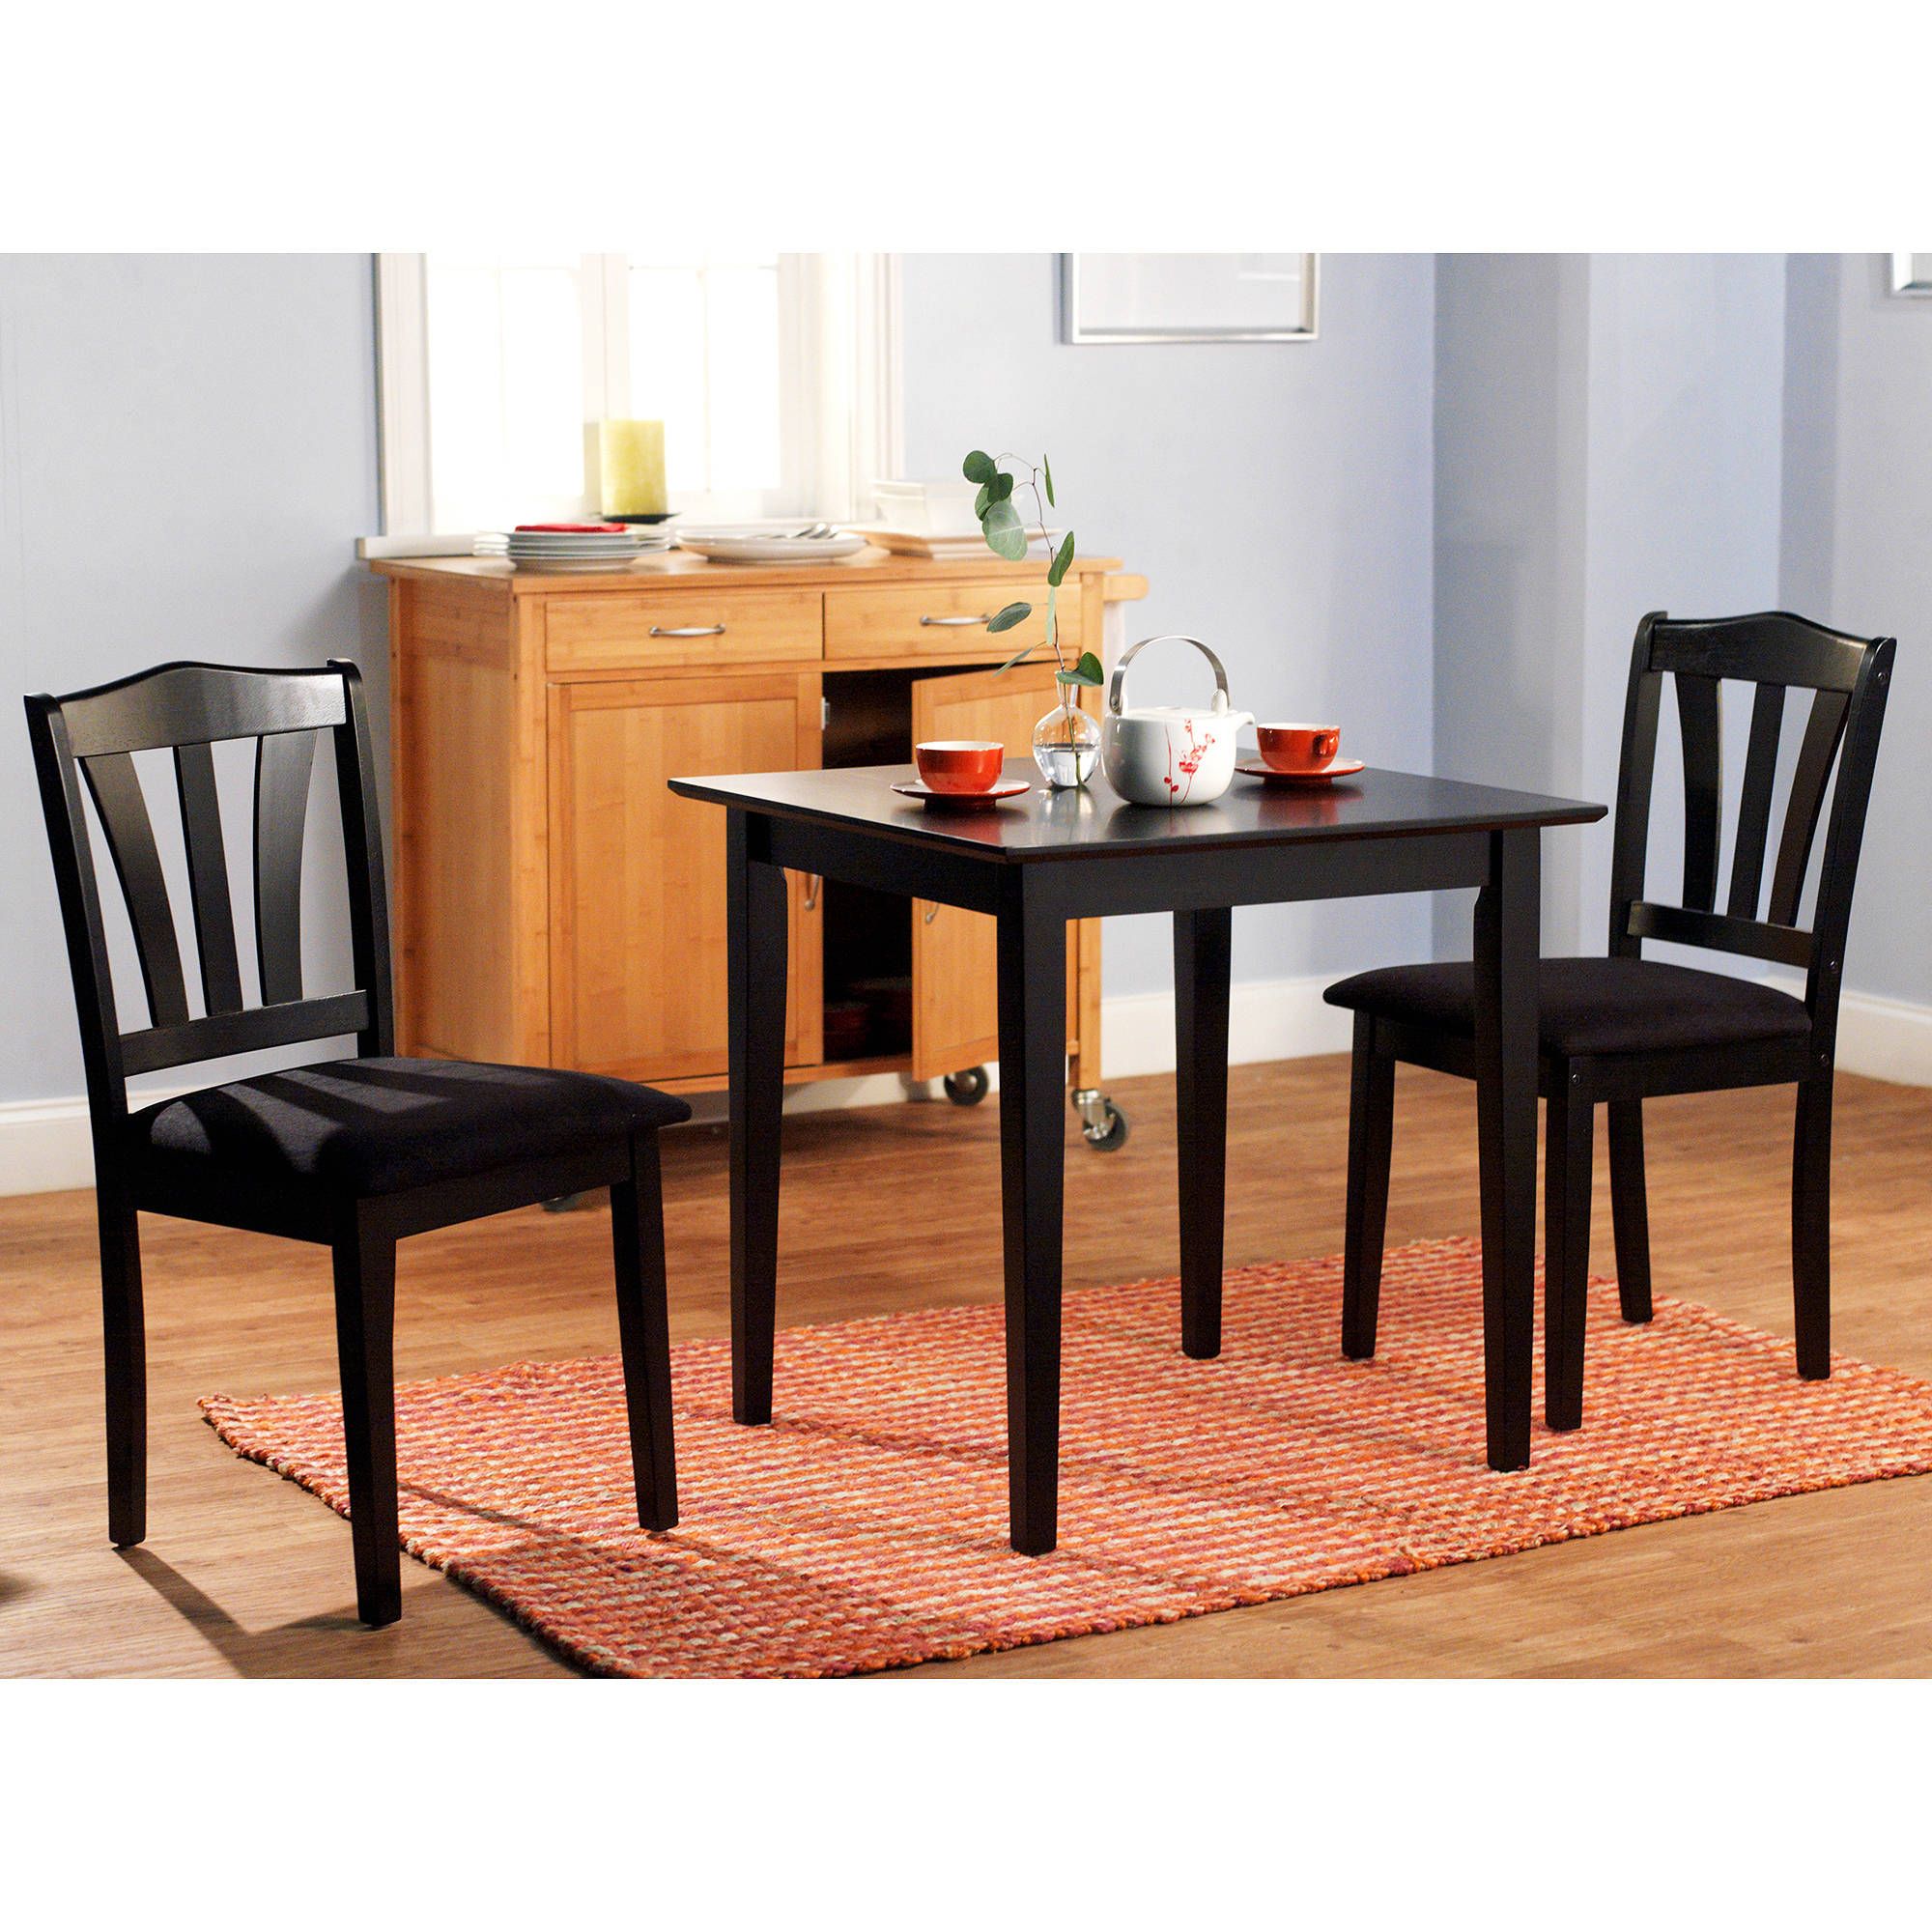 Simple Small Dinette Sets for Small Space